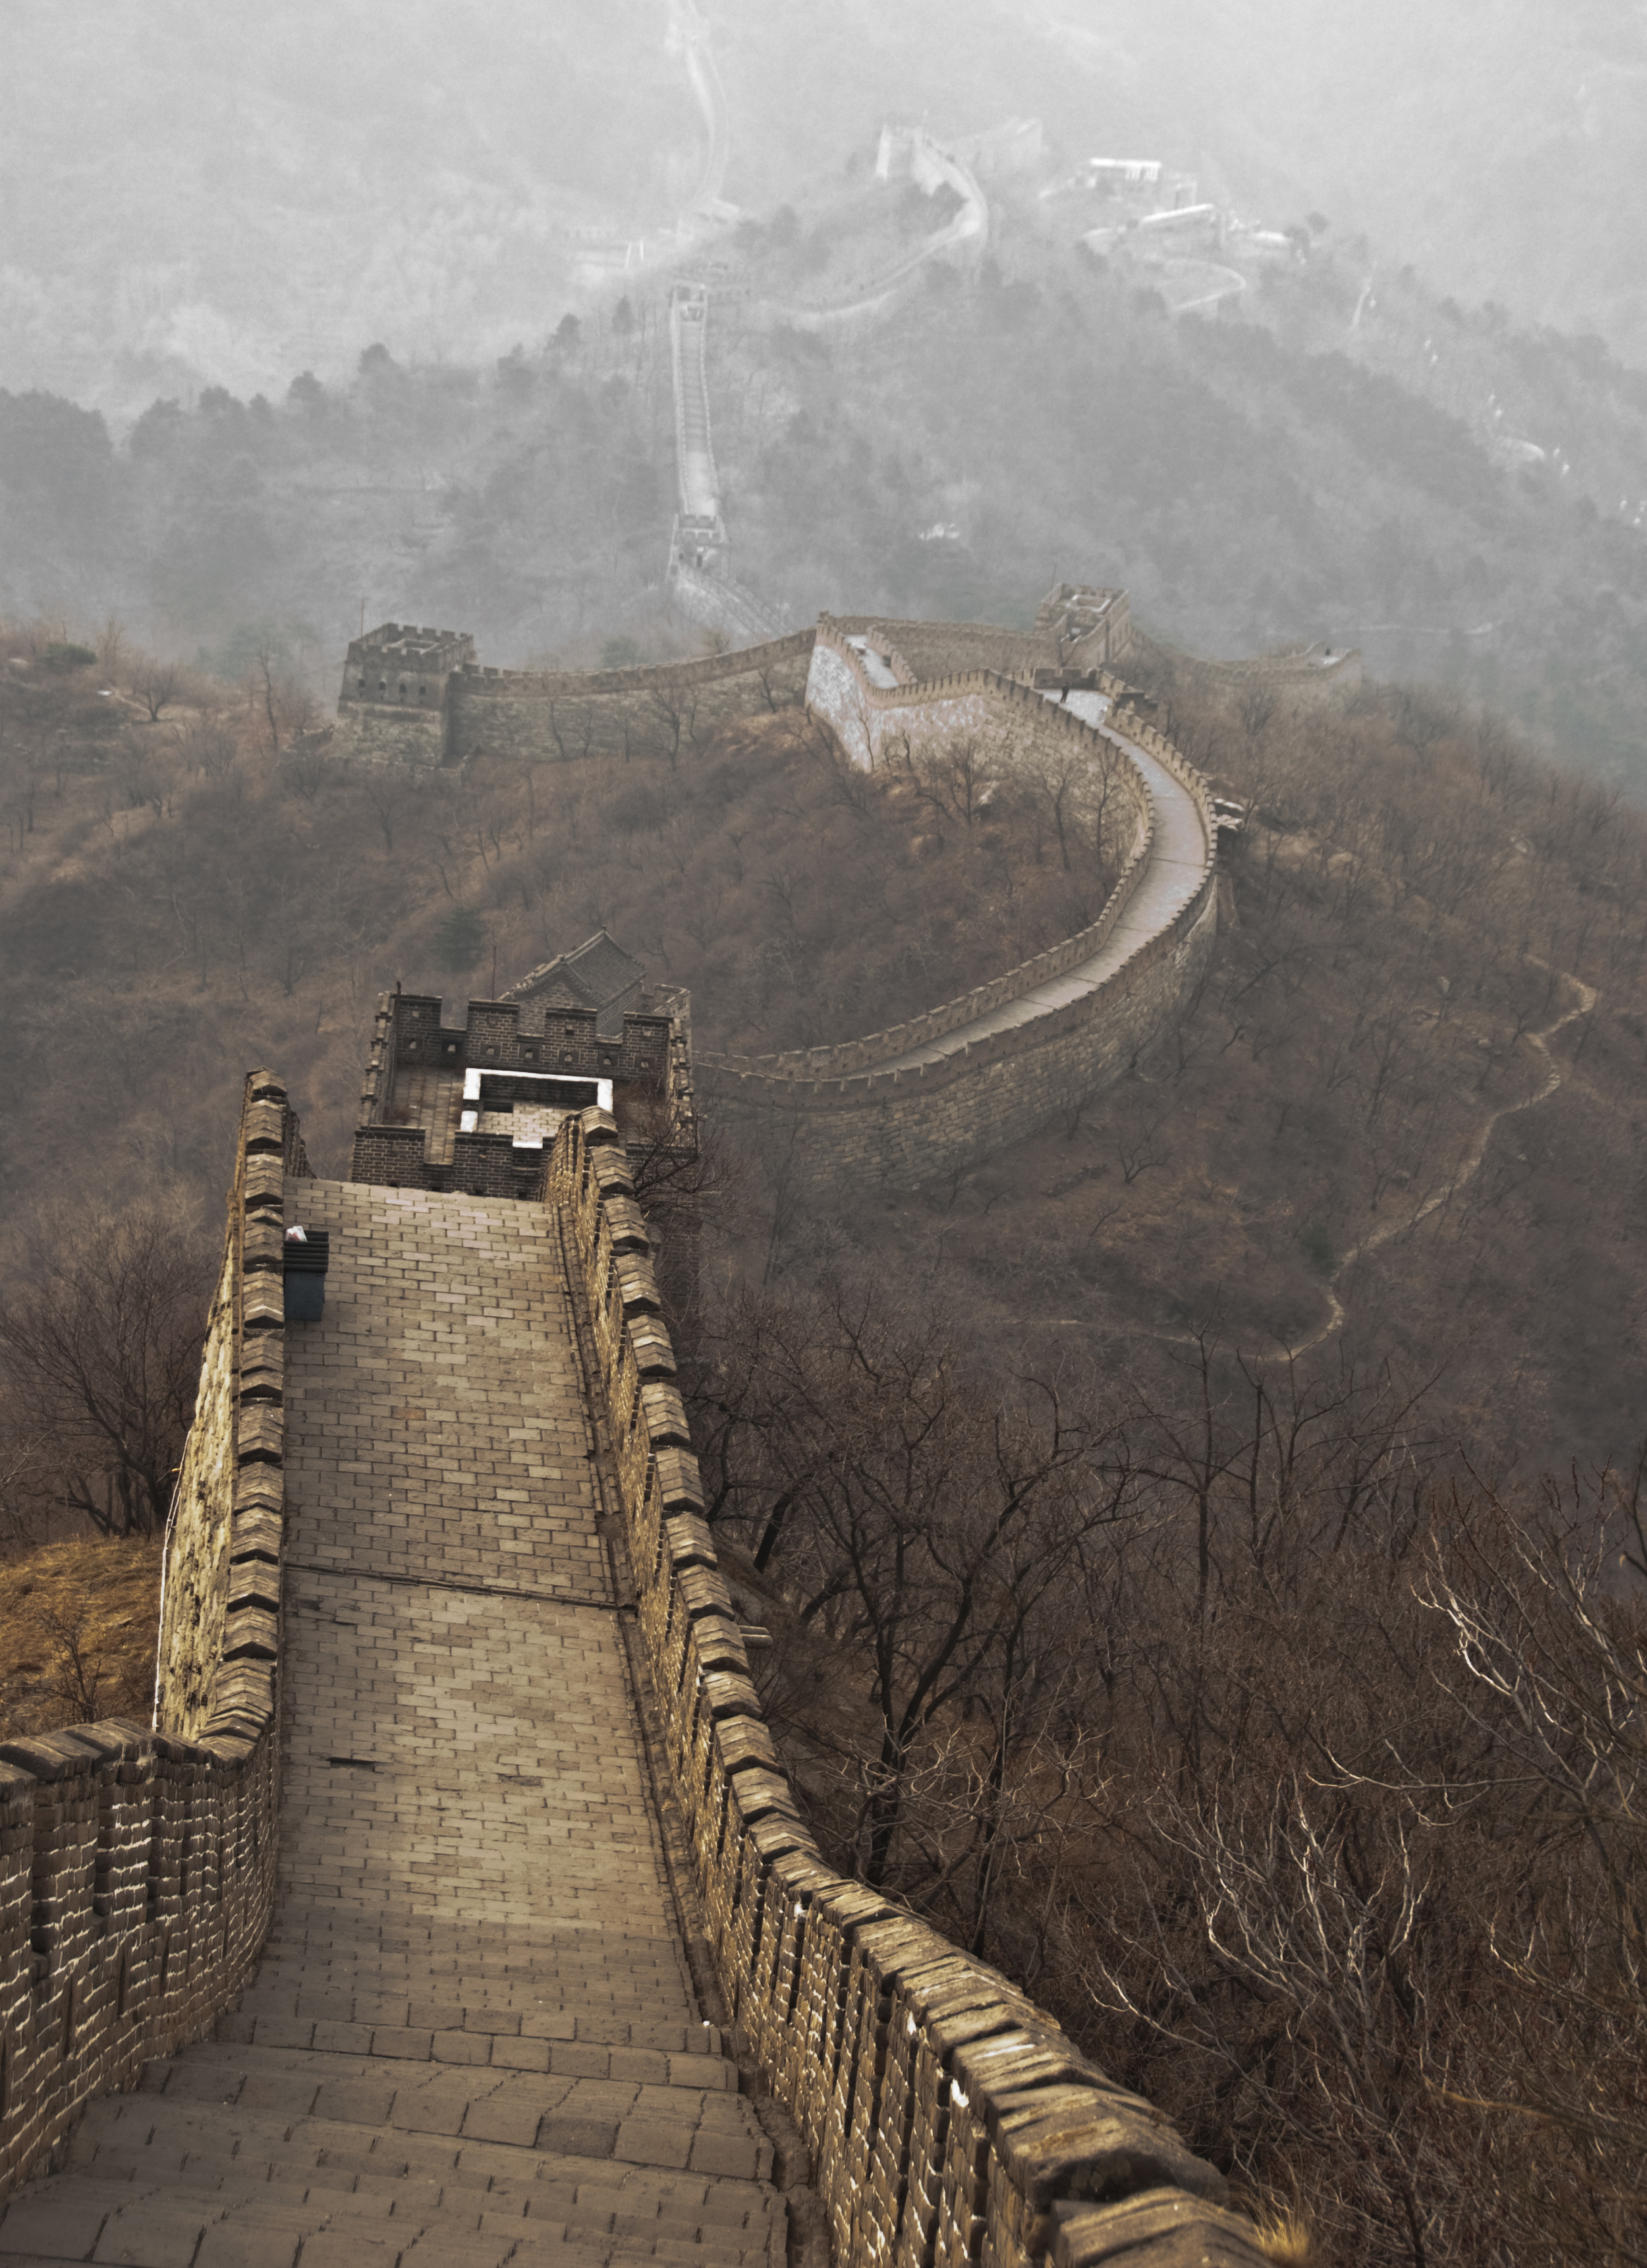  BEIJING, CHINA – The Great Wall in March 2009. 